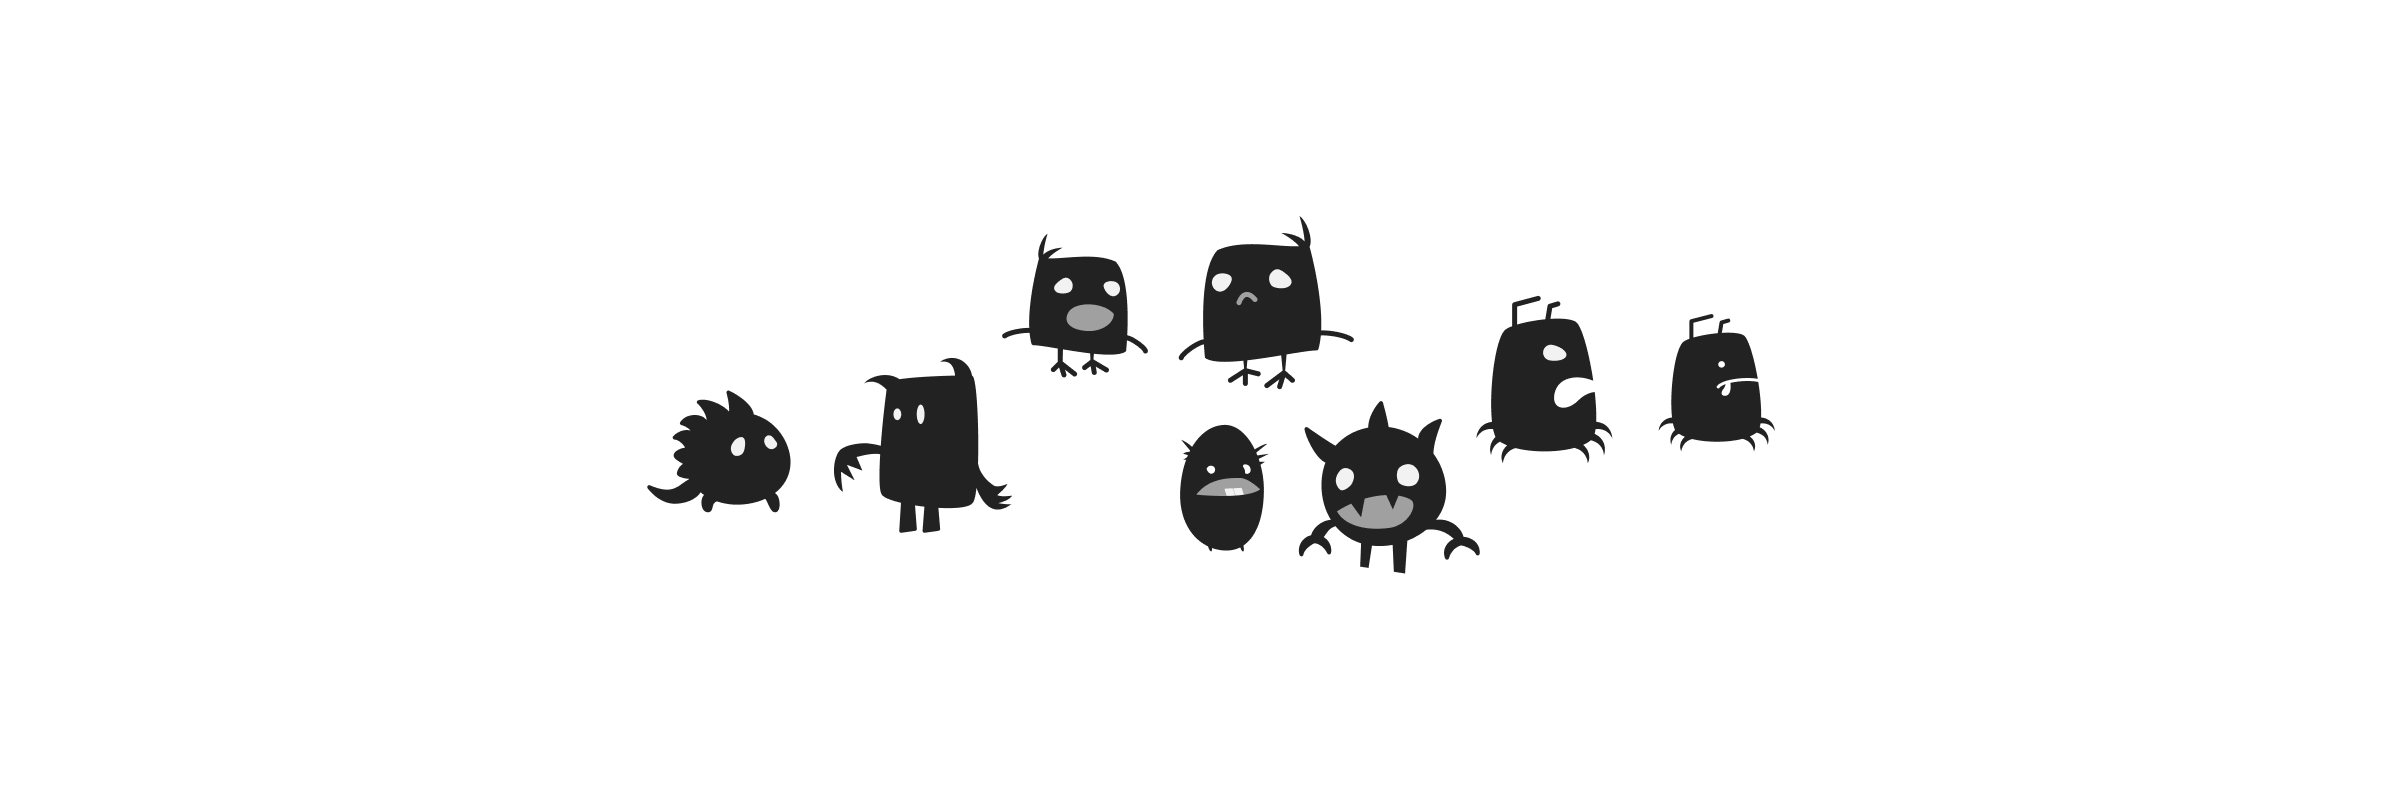 Illustration of various monsters